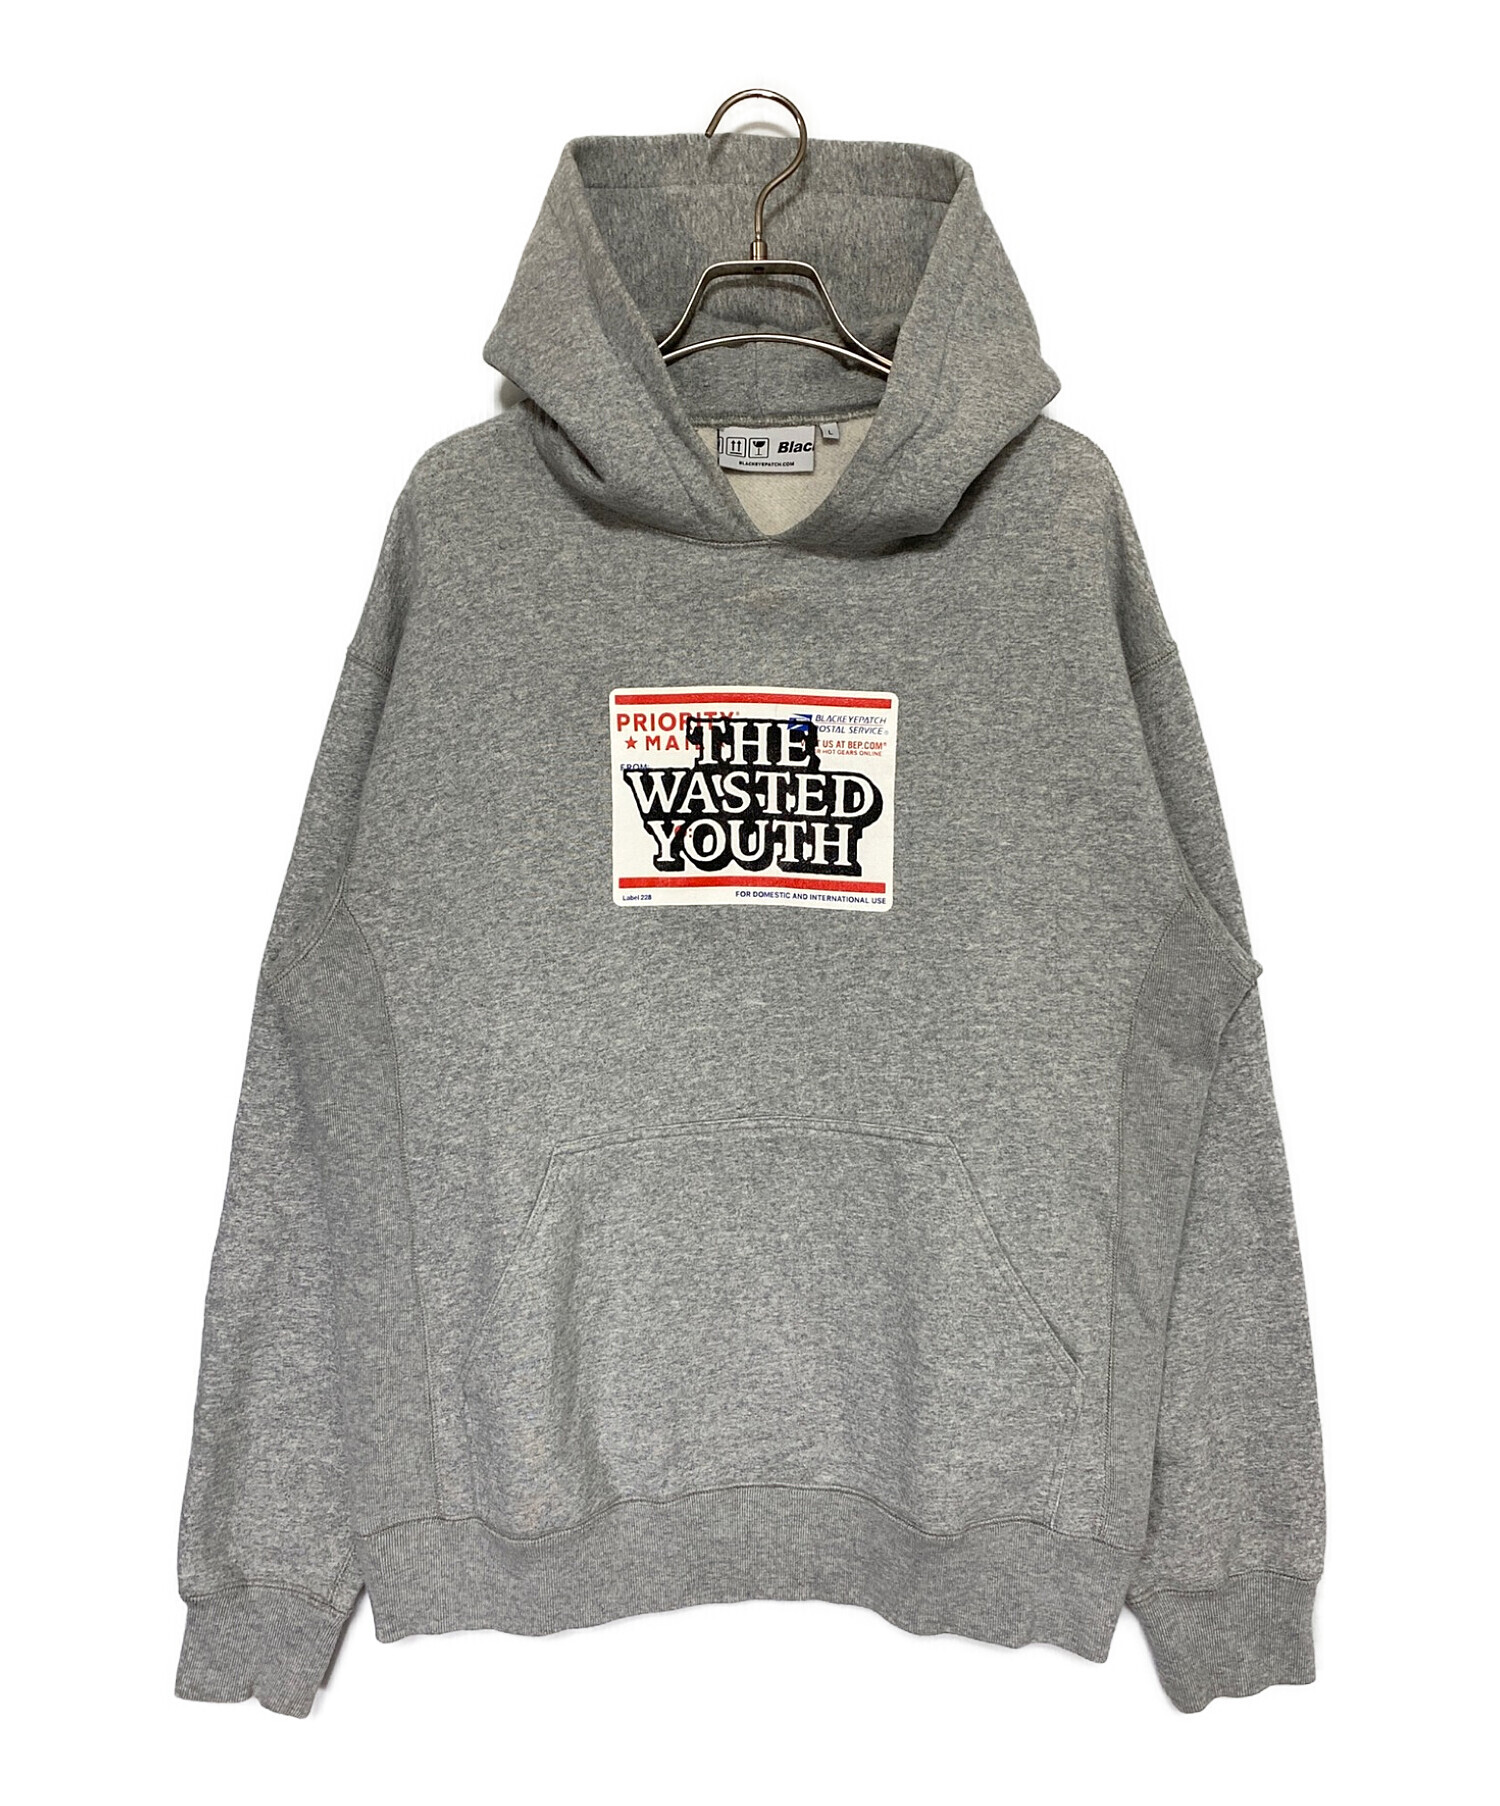 Wasted Youth PRIORITY LABEL HOODIE XL